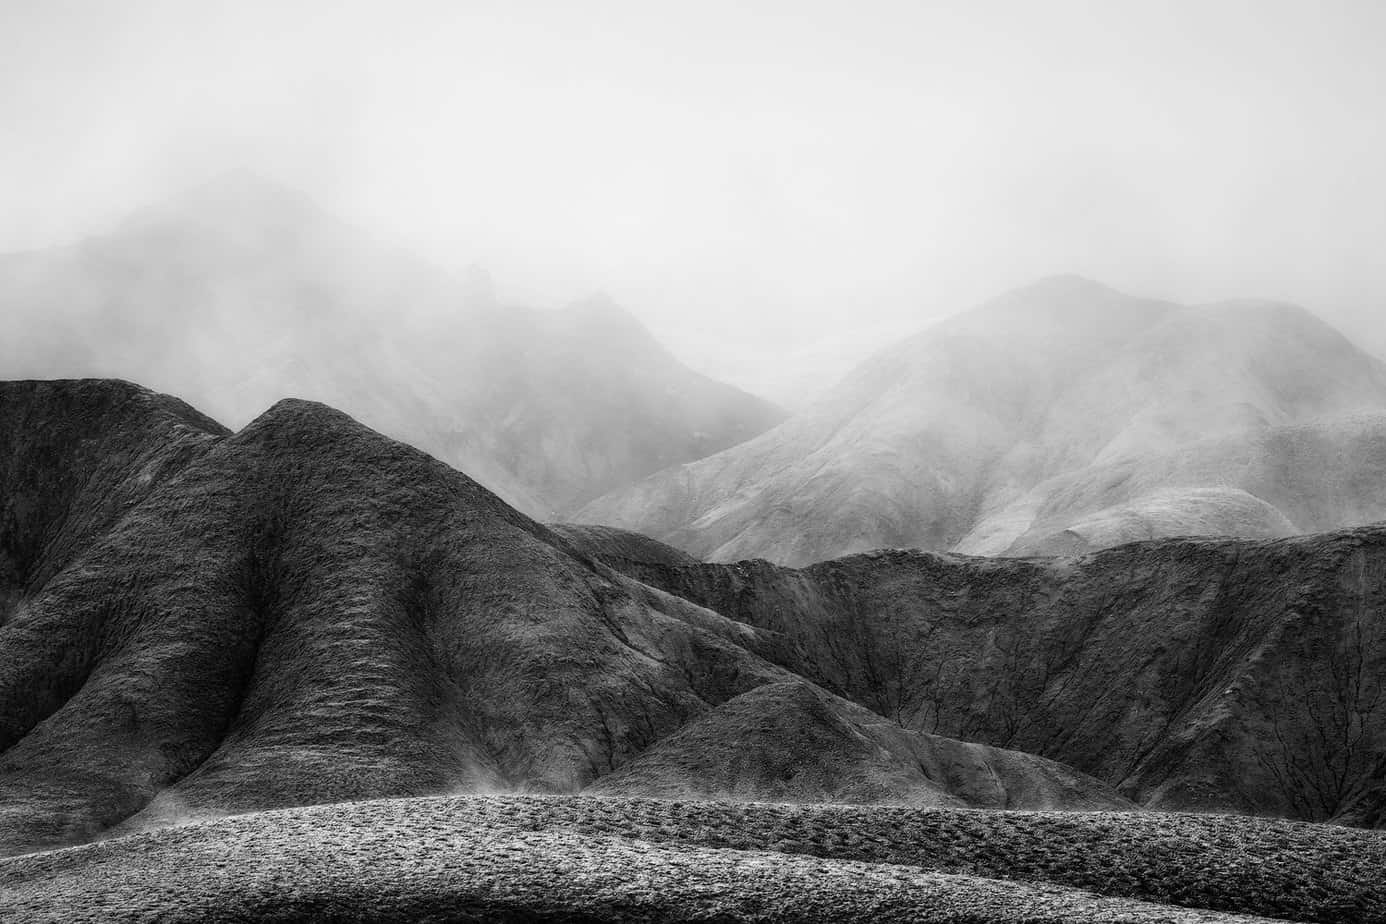 Layers of badlands are revealed as a thick storm clears (Death Valley National Park, California)